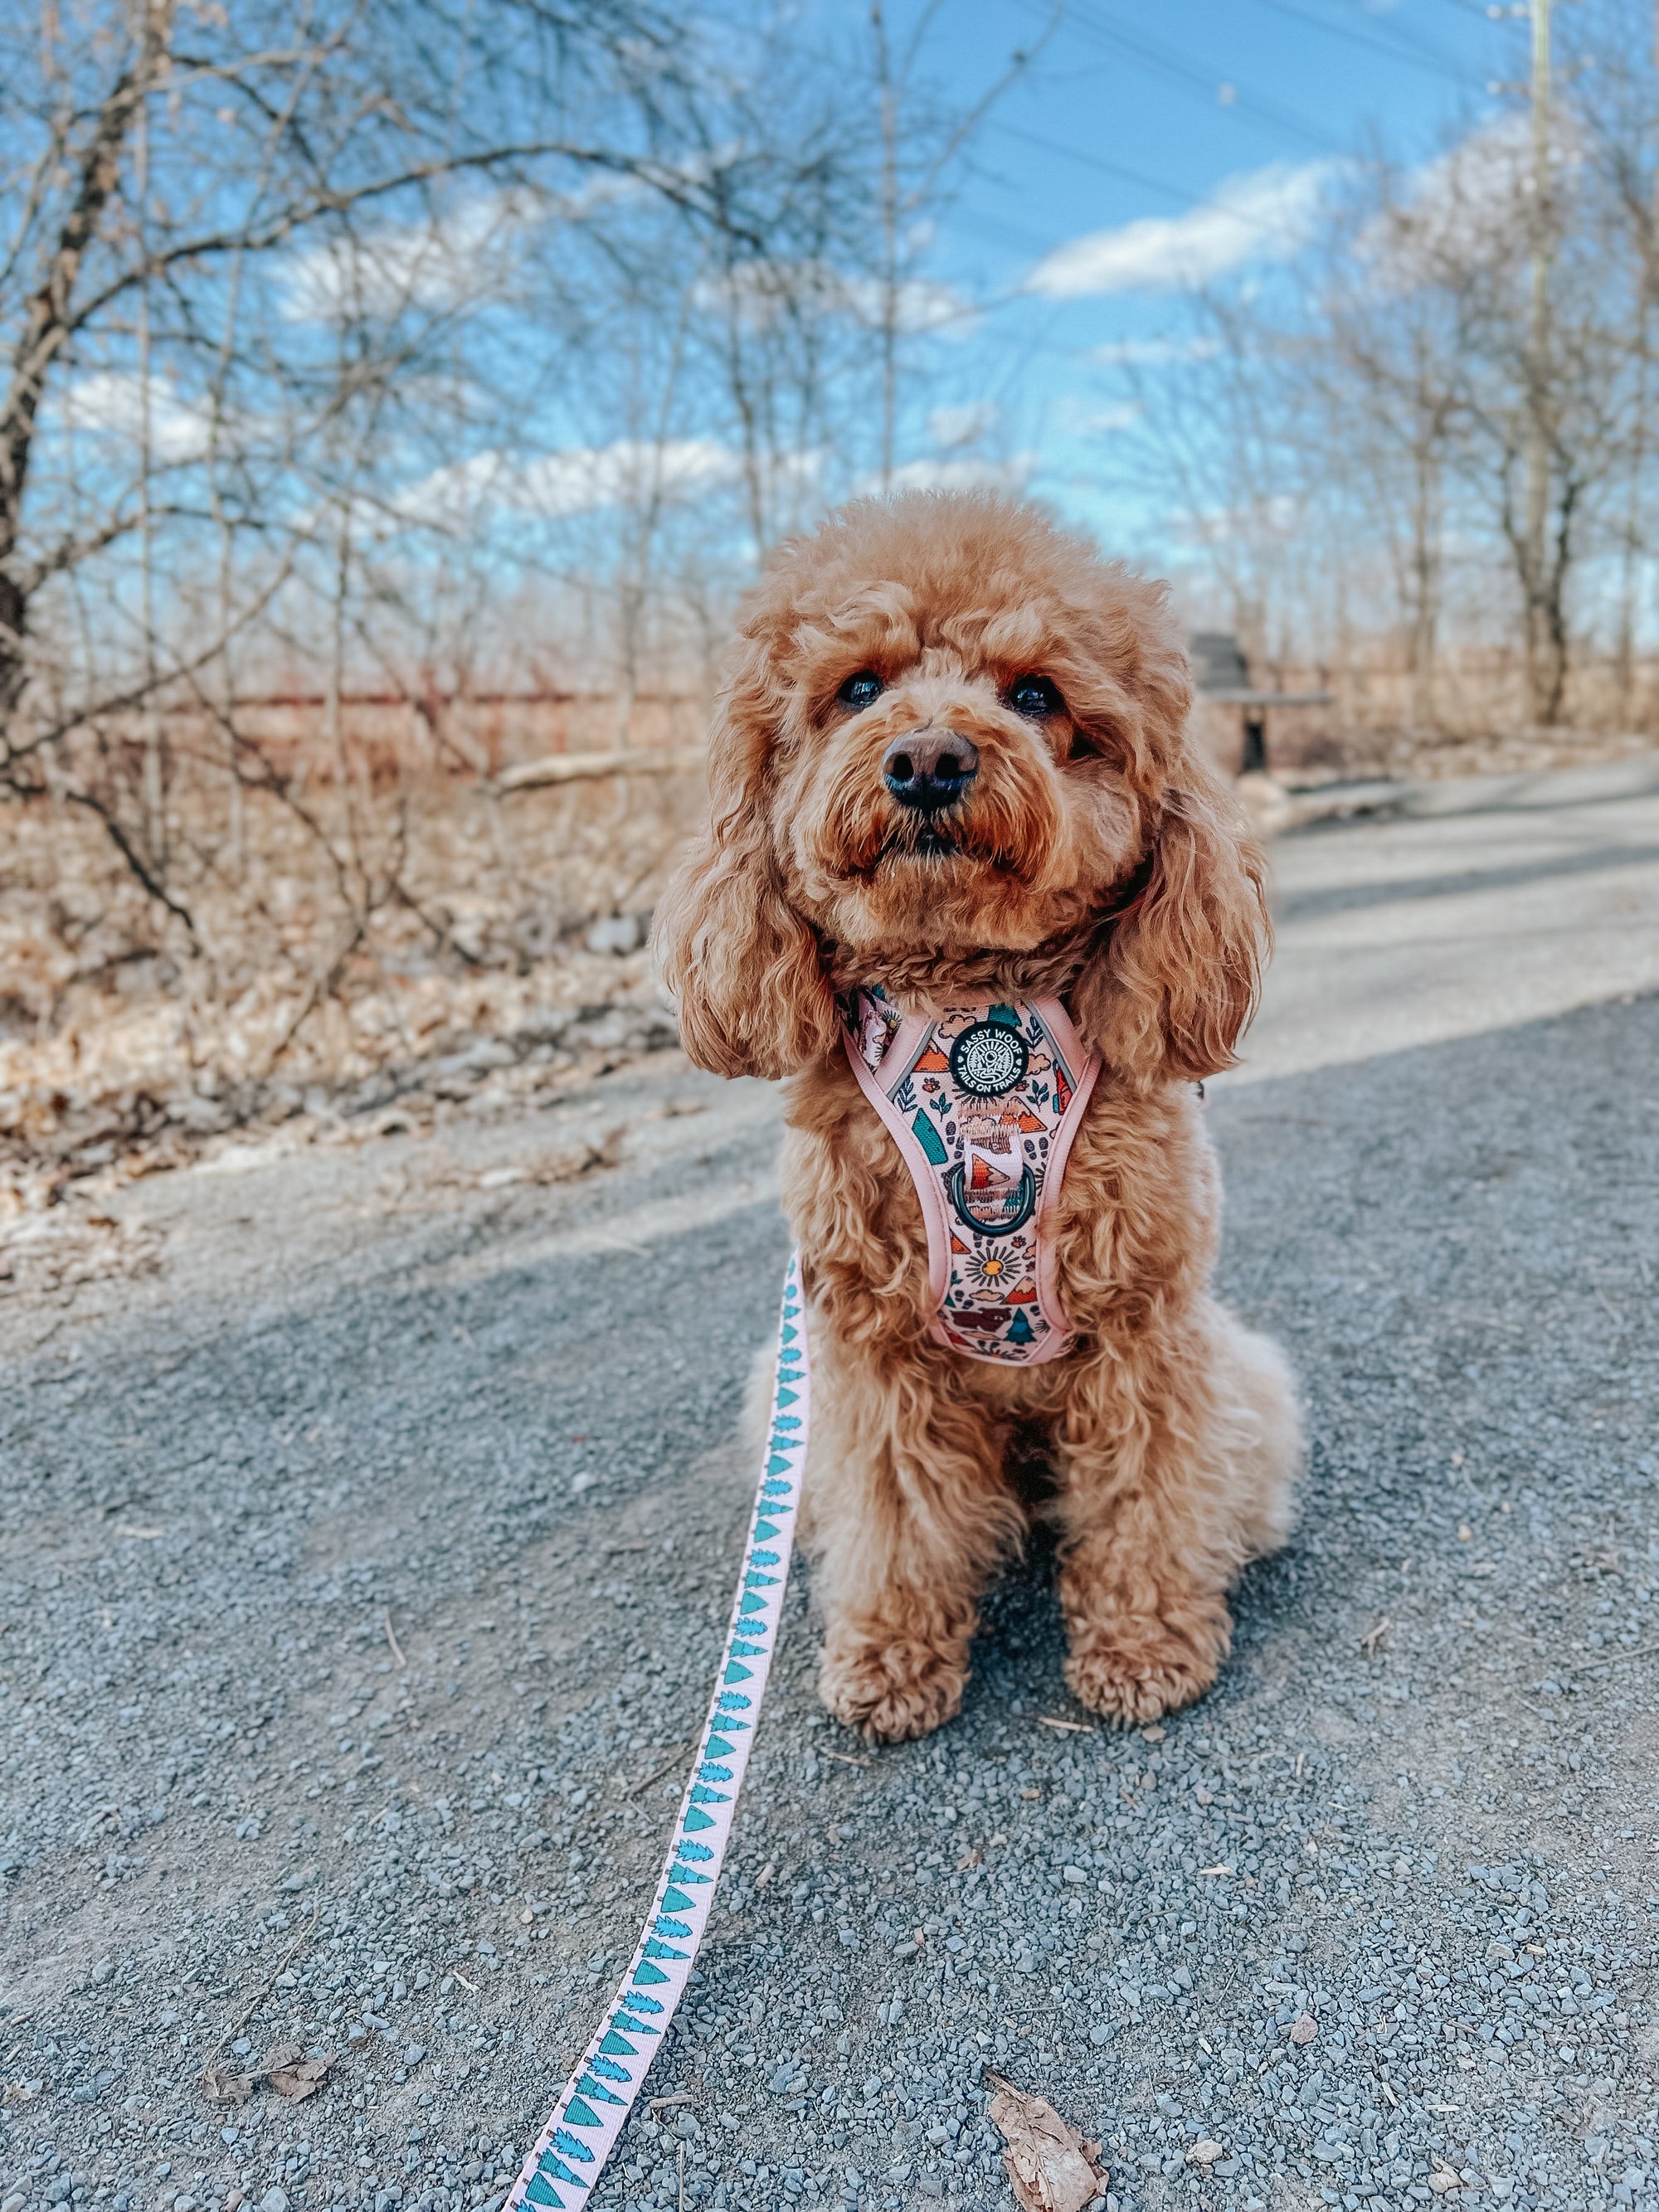 INFLUENCER_CONTENT | @GEORGIE.THECAVAPOO | SIZE M